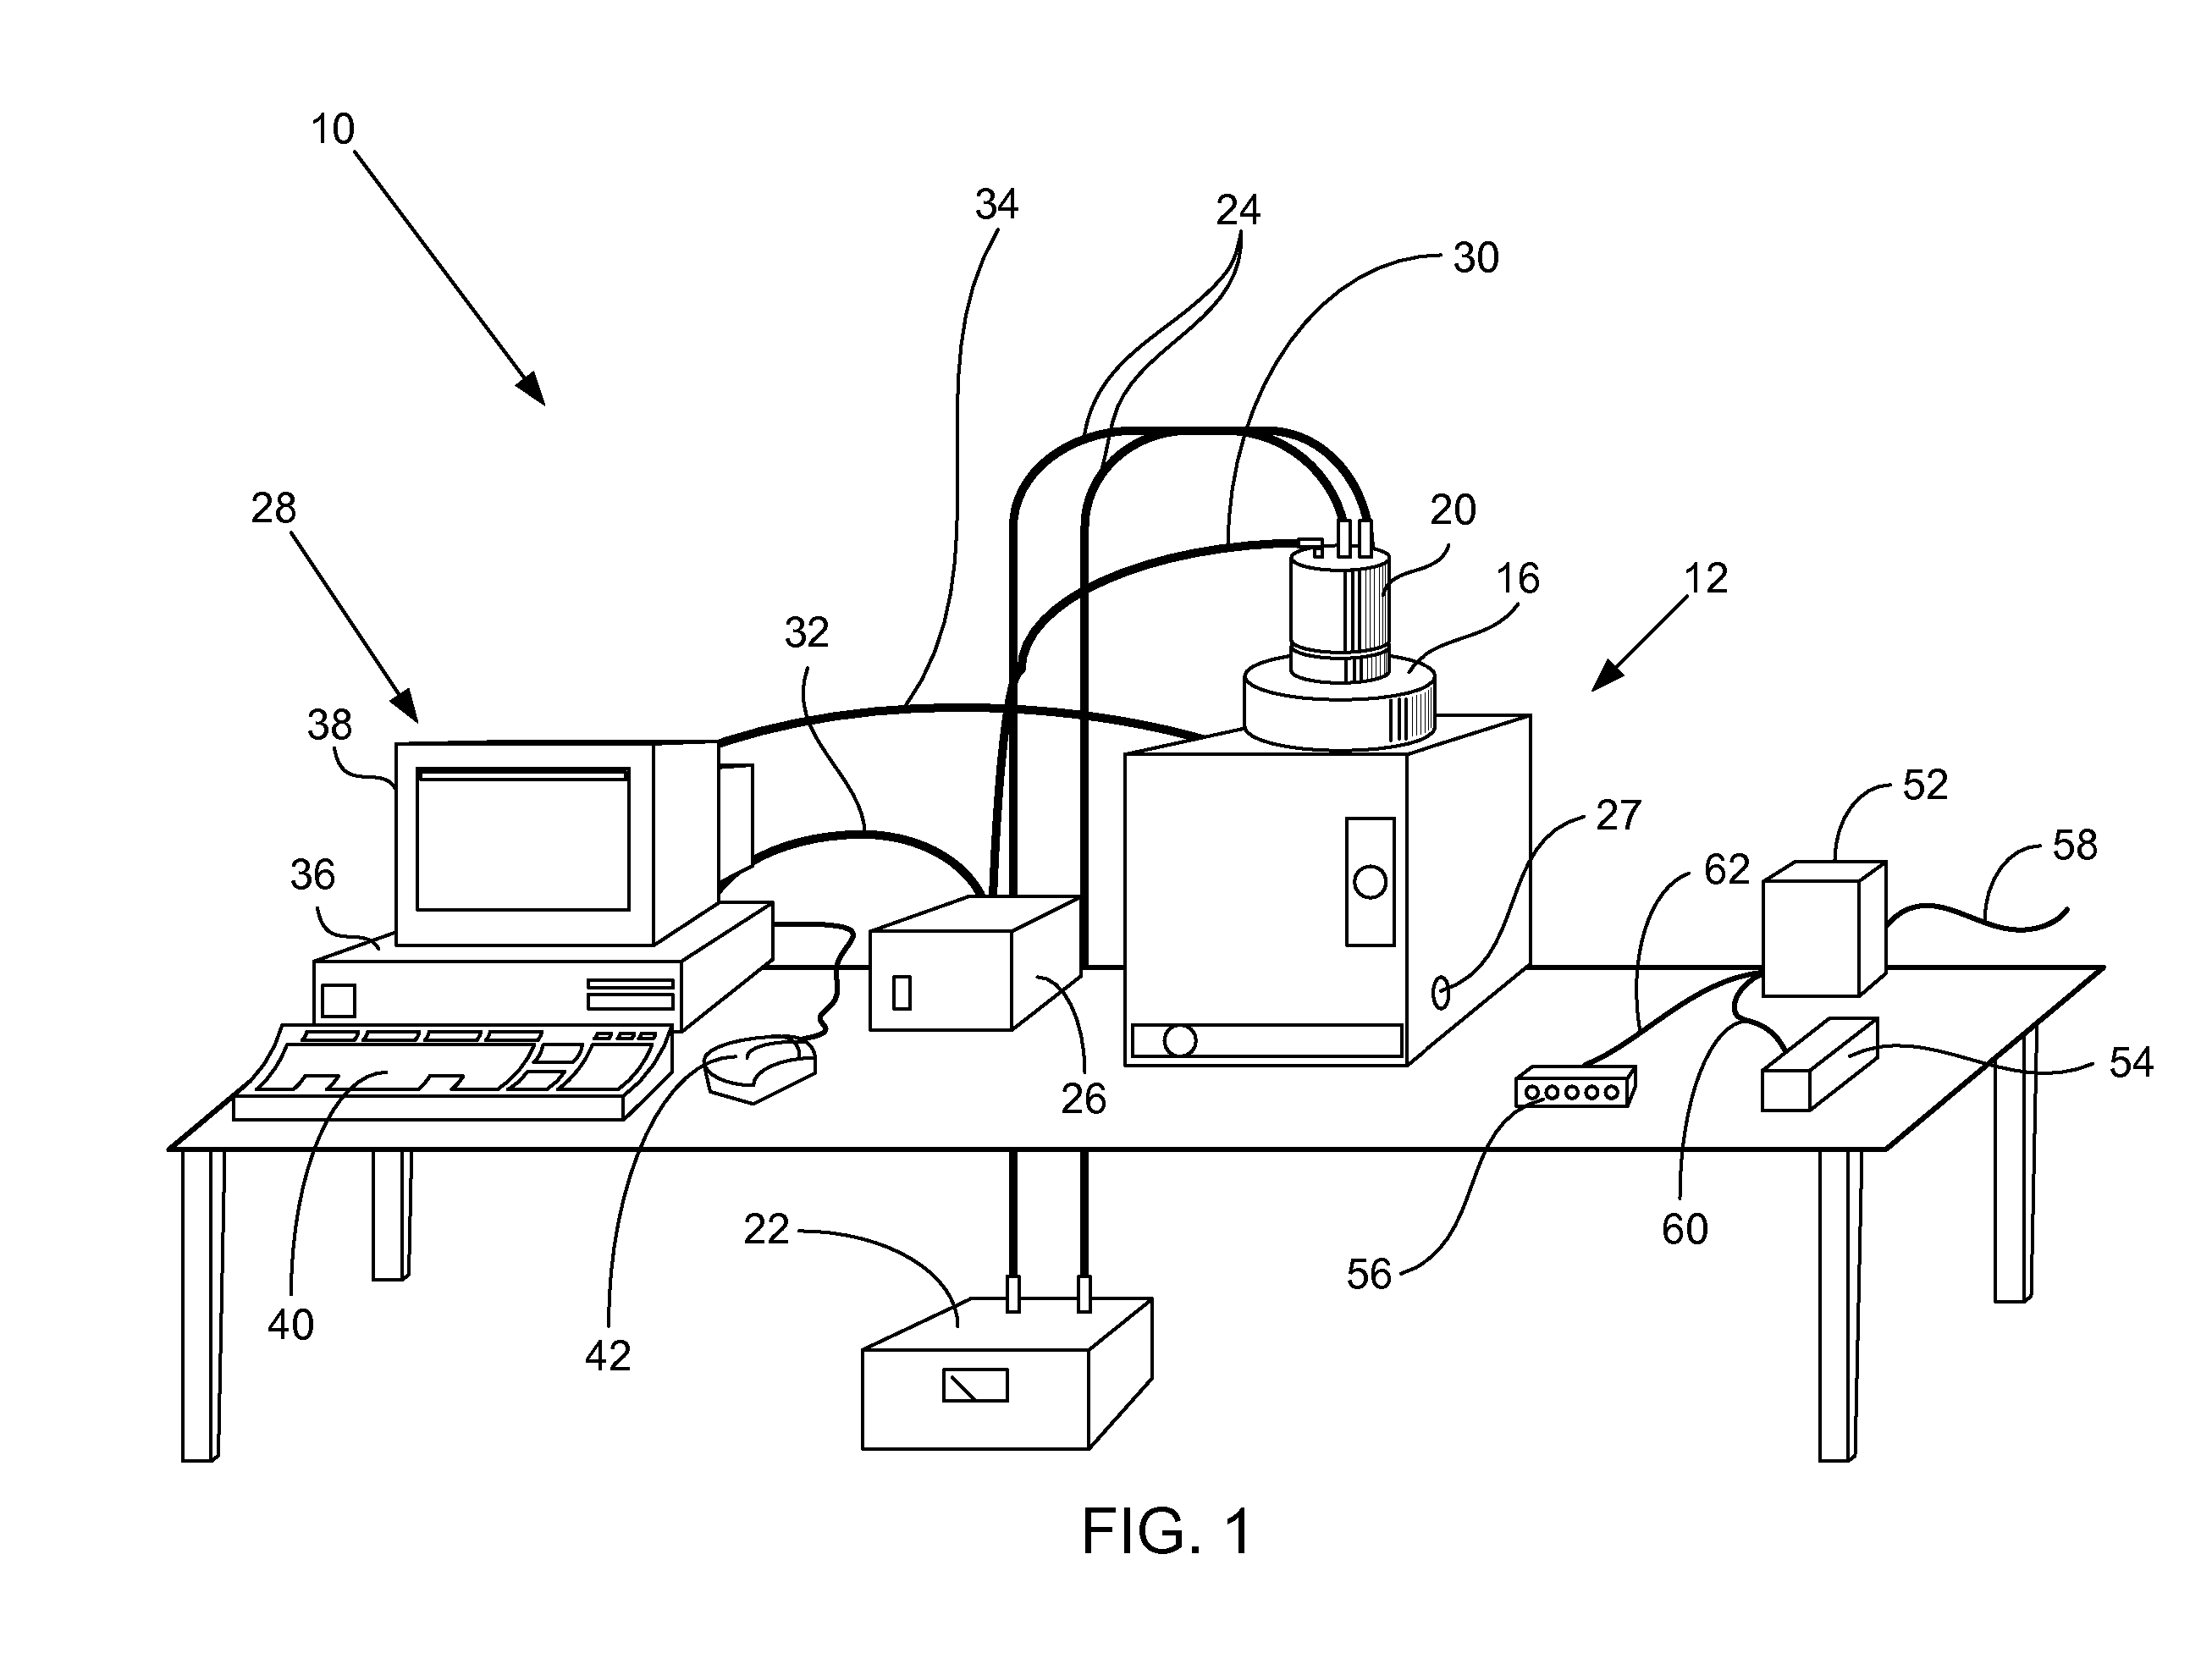 Anesthesia delivery device for use in a light imaging system